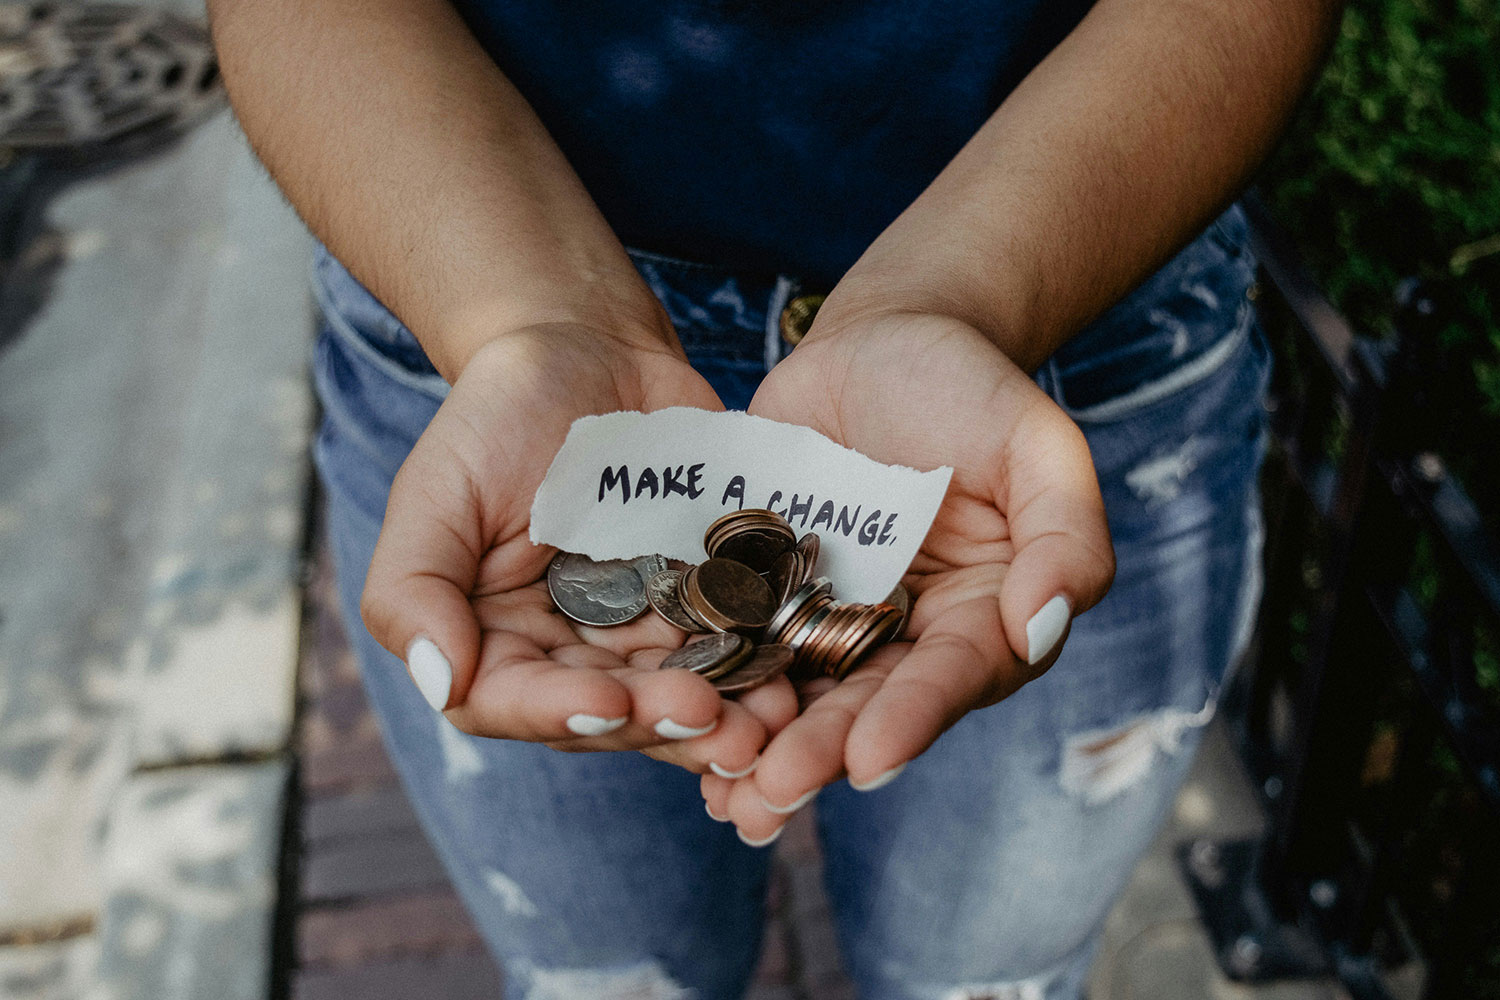 A person holding a number of coins and a piece of paper with "make a change" written on it